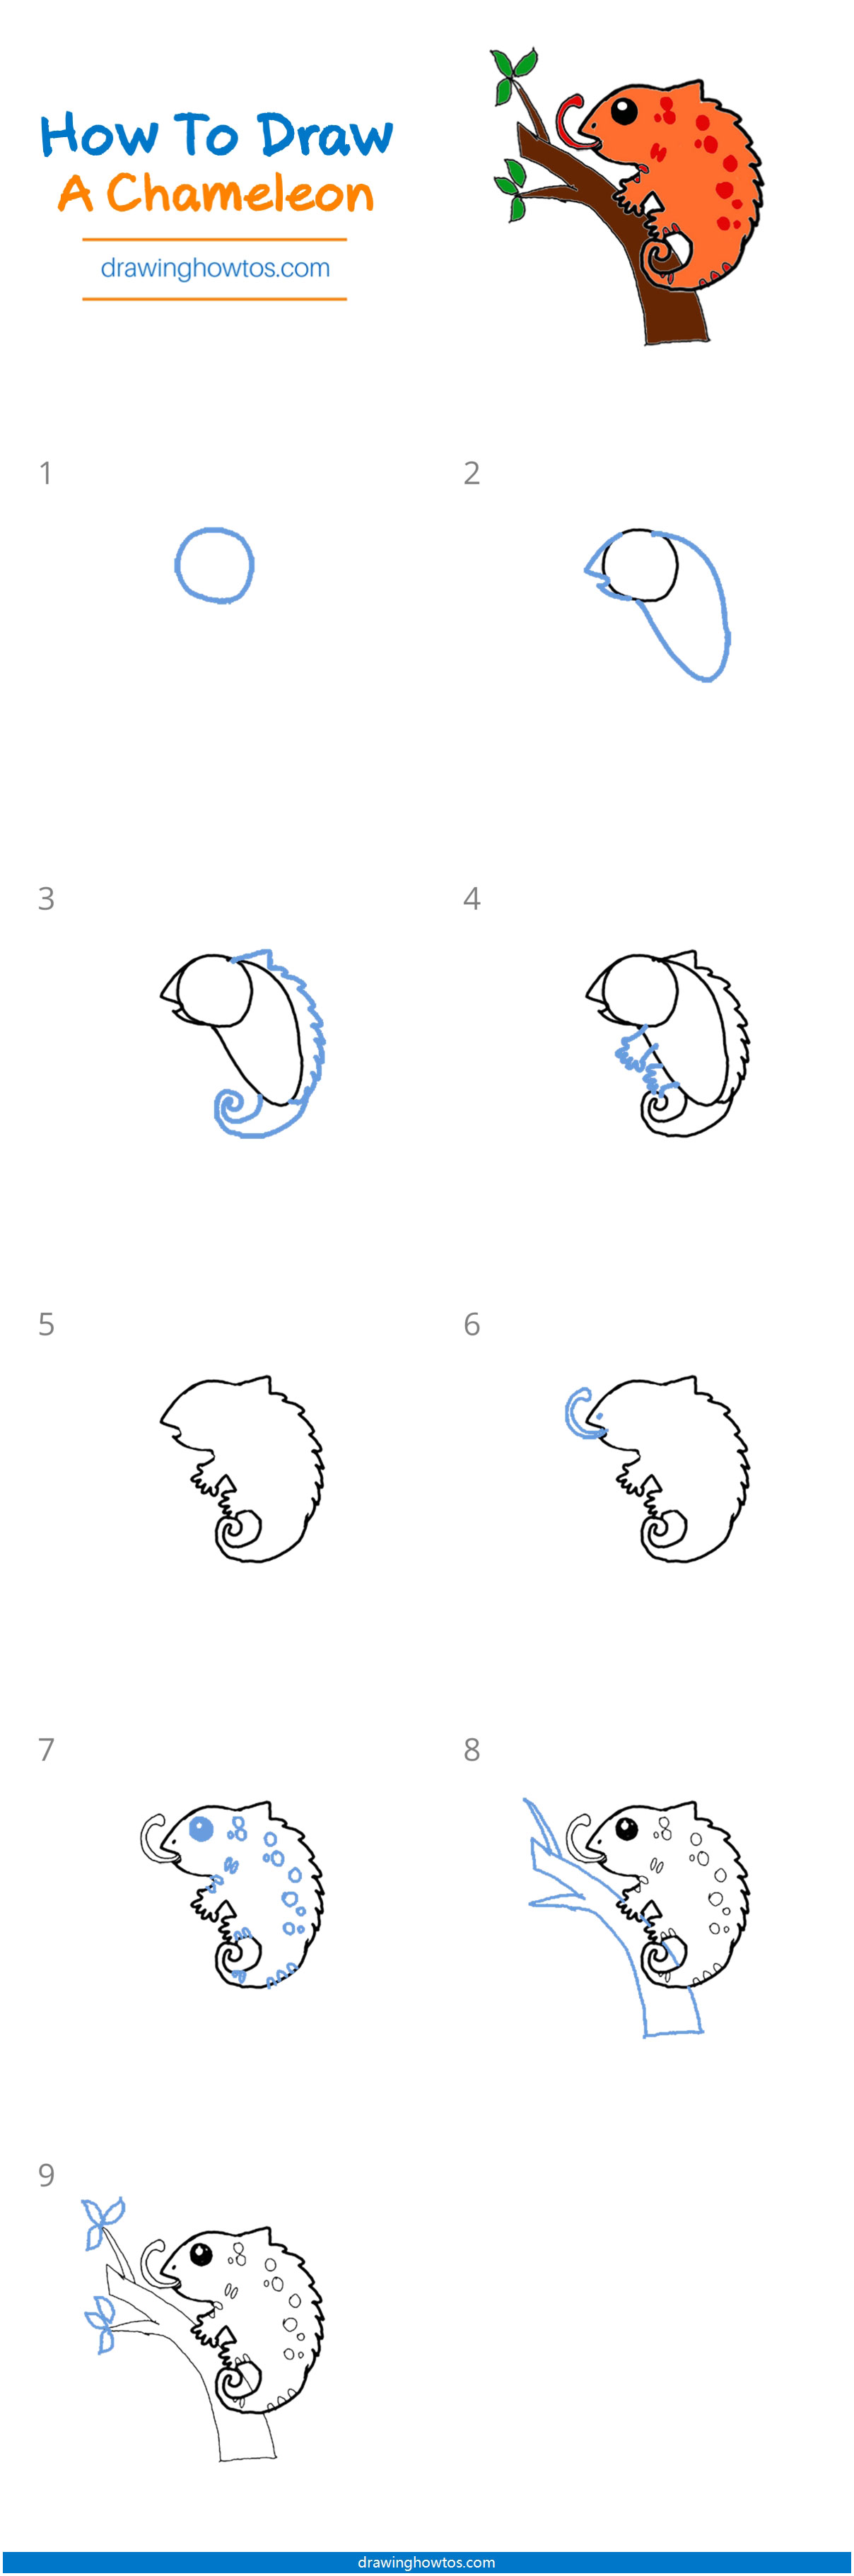 How to Draw a Chameleon Step by Step